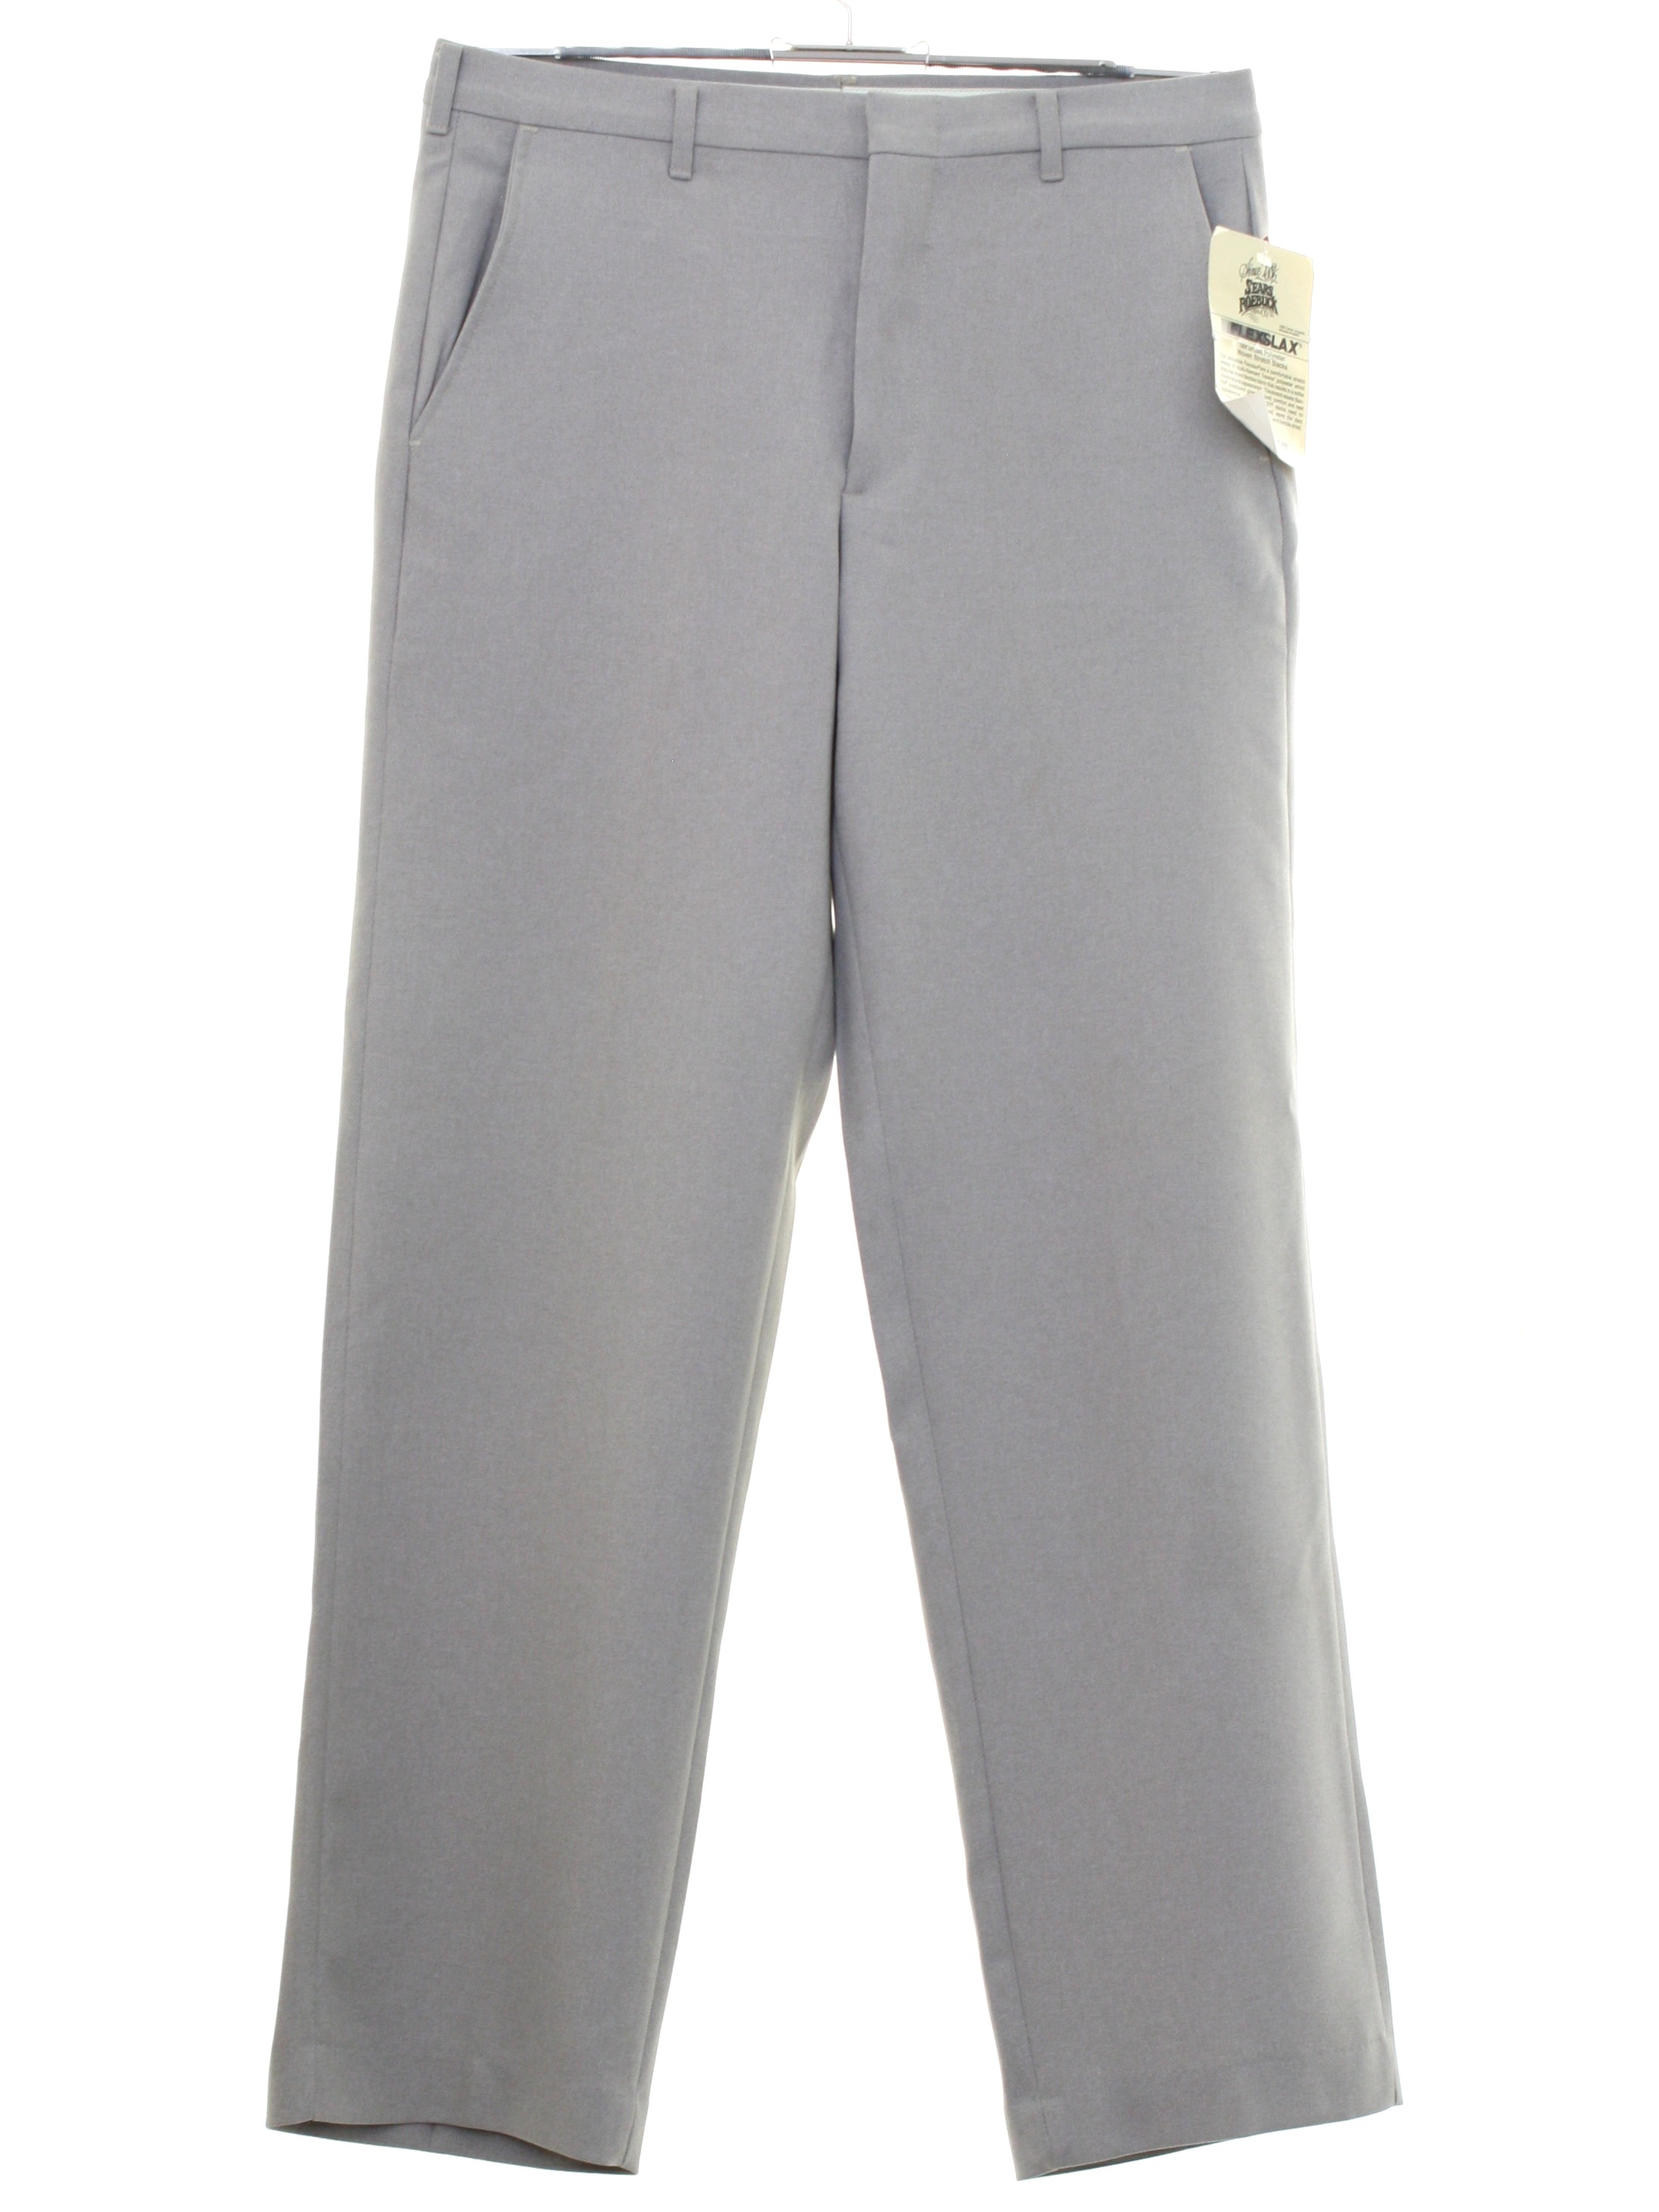 Retro Eighties Pants: Early 80s -Sears Roebuck and Co.- Mens gray solid ...